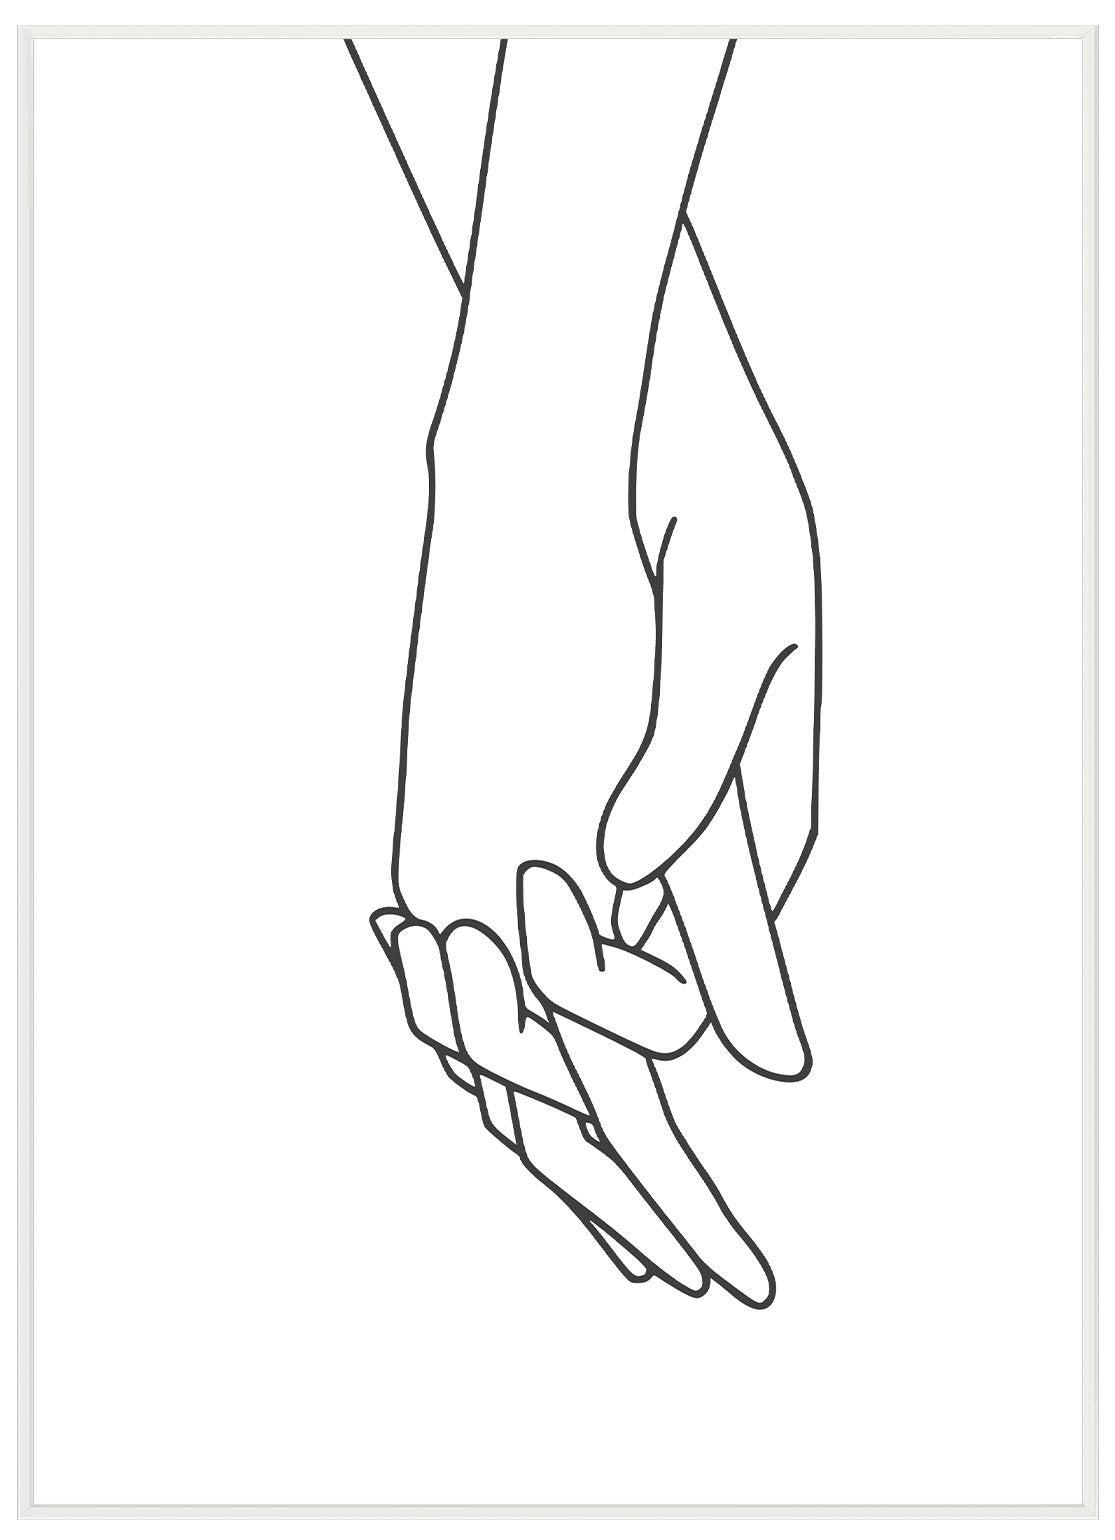 Lineart Holding Hands - Avemfactory